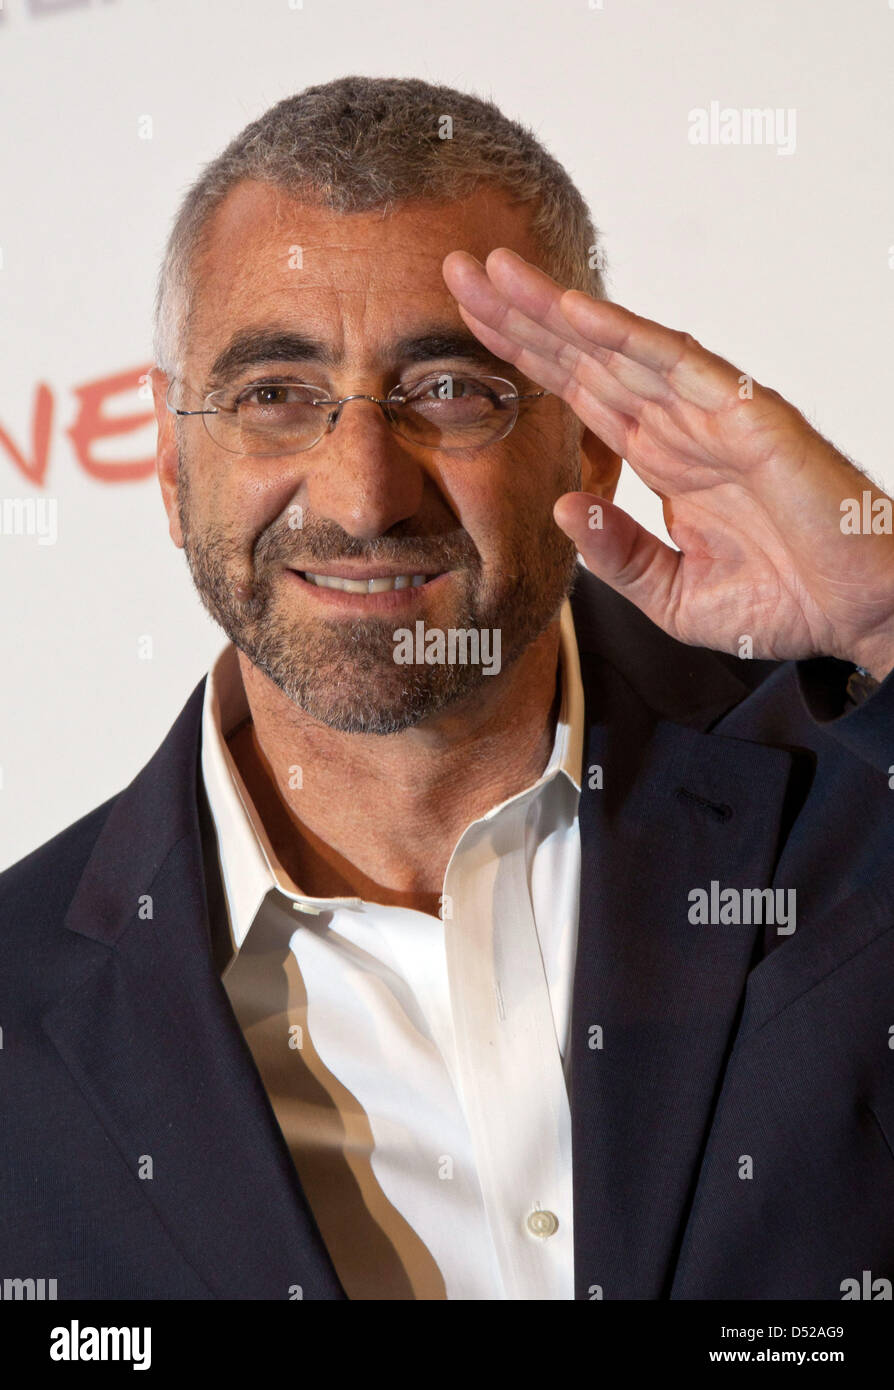 Director Duane Baughman poses for a picture at a promotional event for the film 'Bhutto' during the 5th Rome International Film Festival at Auditorium Parco della Musica in Rome, Italy, October 30, 2010. Photo: Hubert Boesl Stock Photo